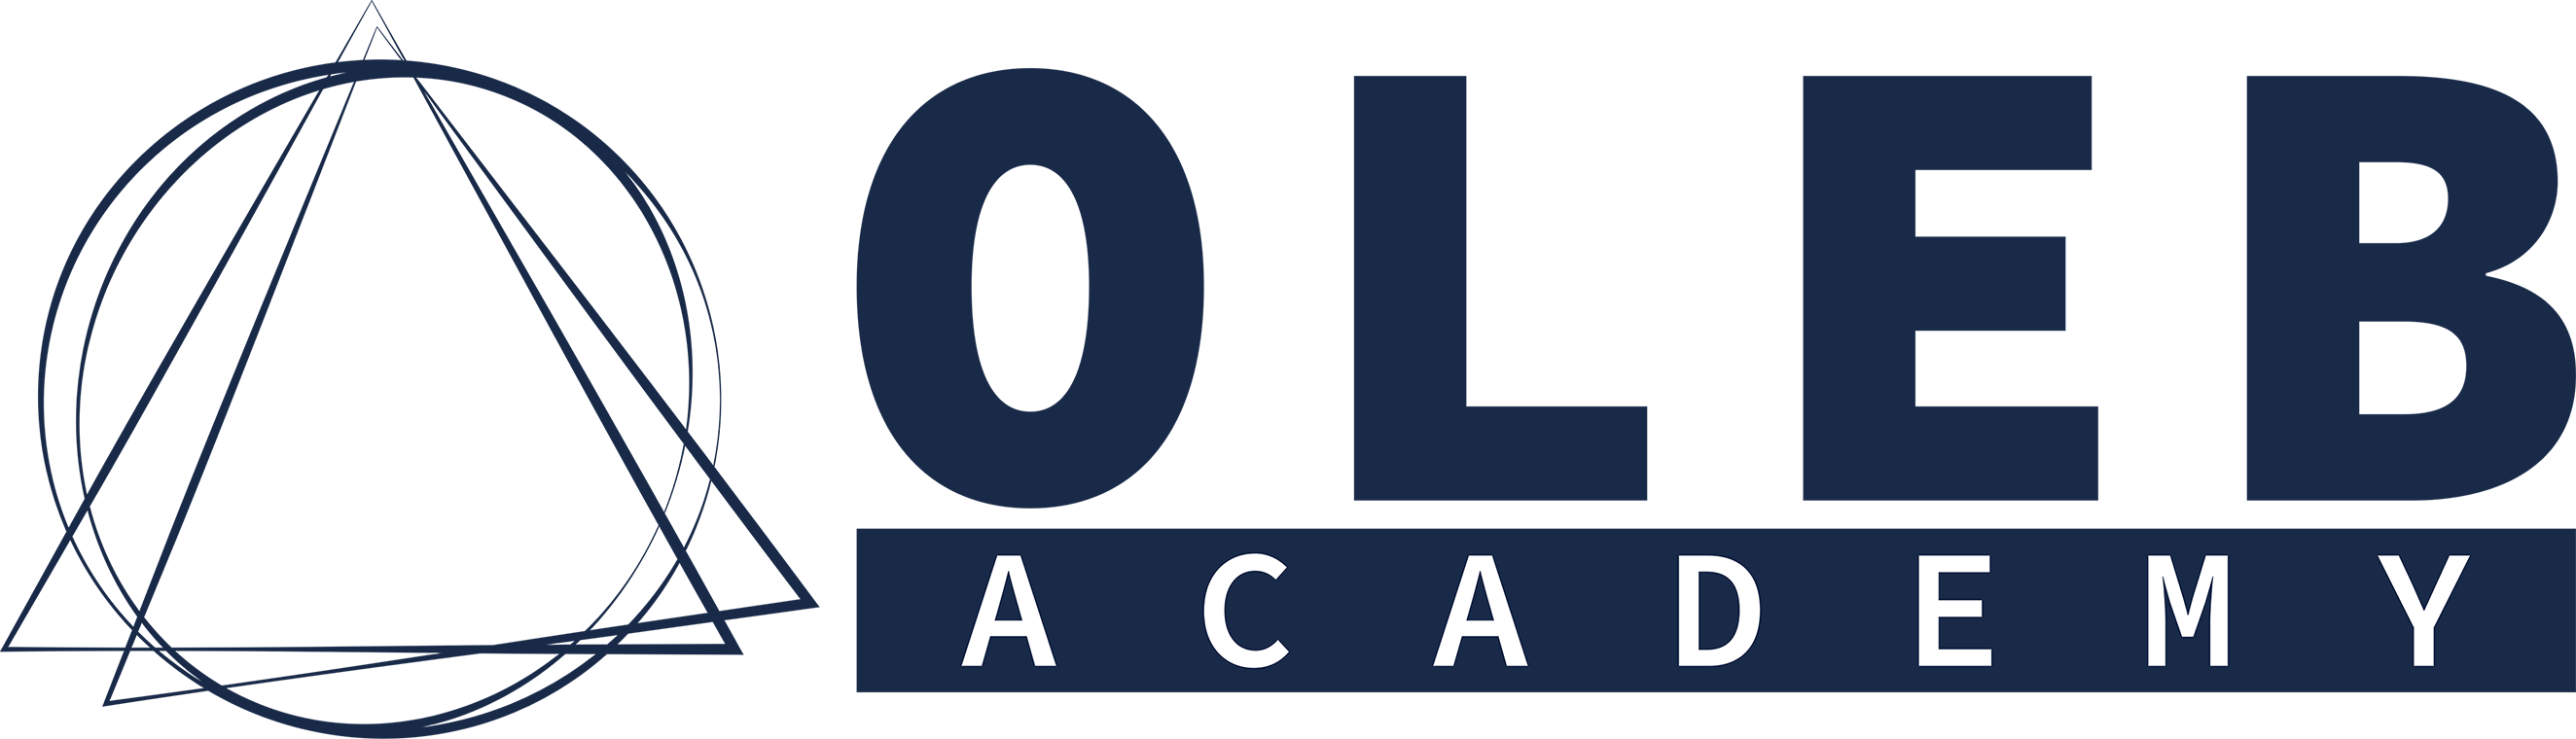 Oleb Academy logo featuring two circles and two triangles overlapping to the left of the text: Oleb Academy.